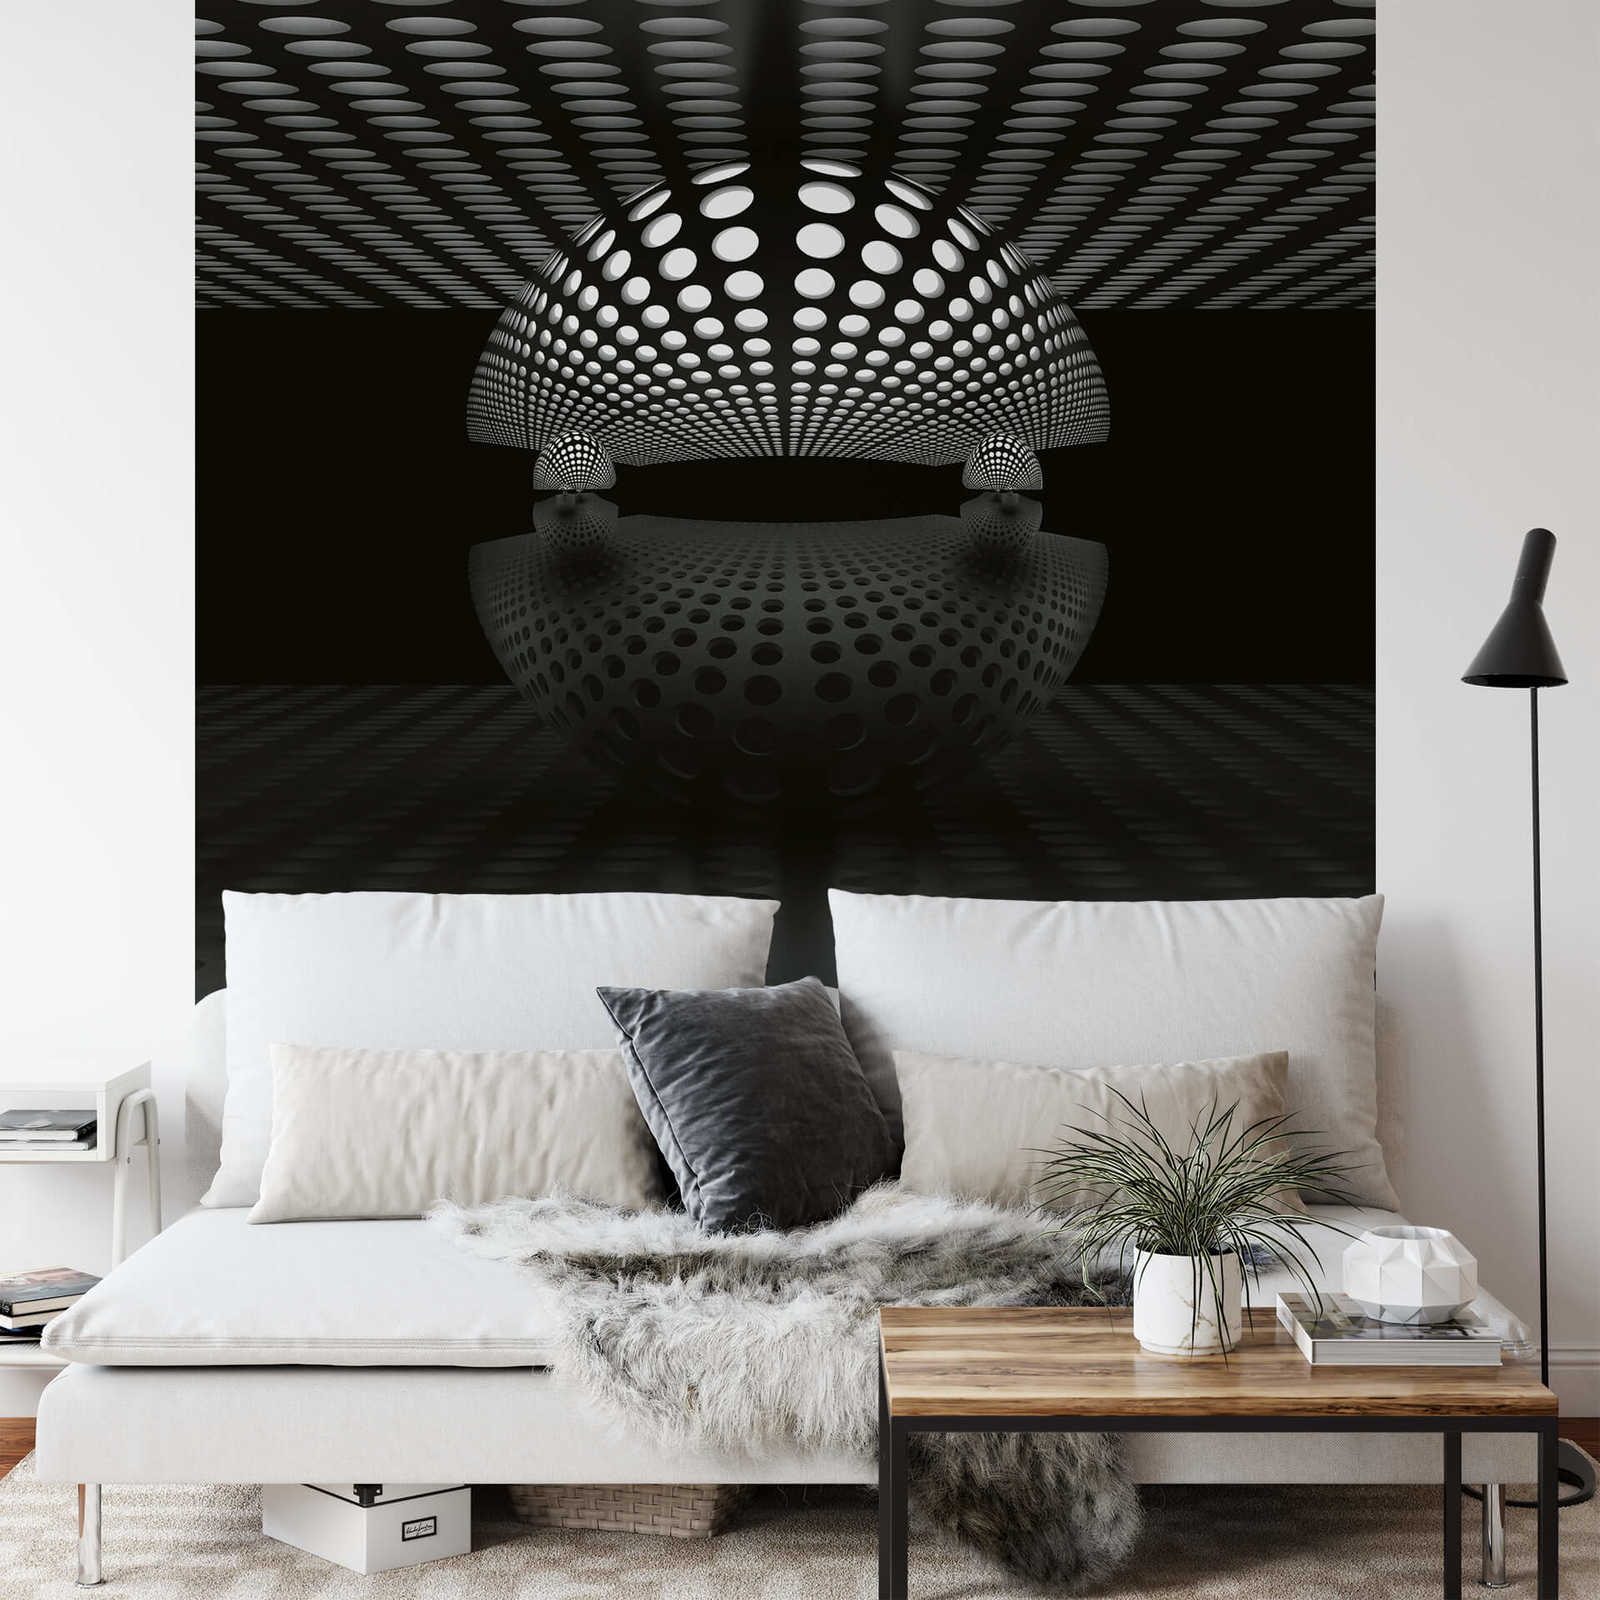             Photo wallpaper abstract 3D sphere - black, grey, white
        